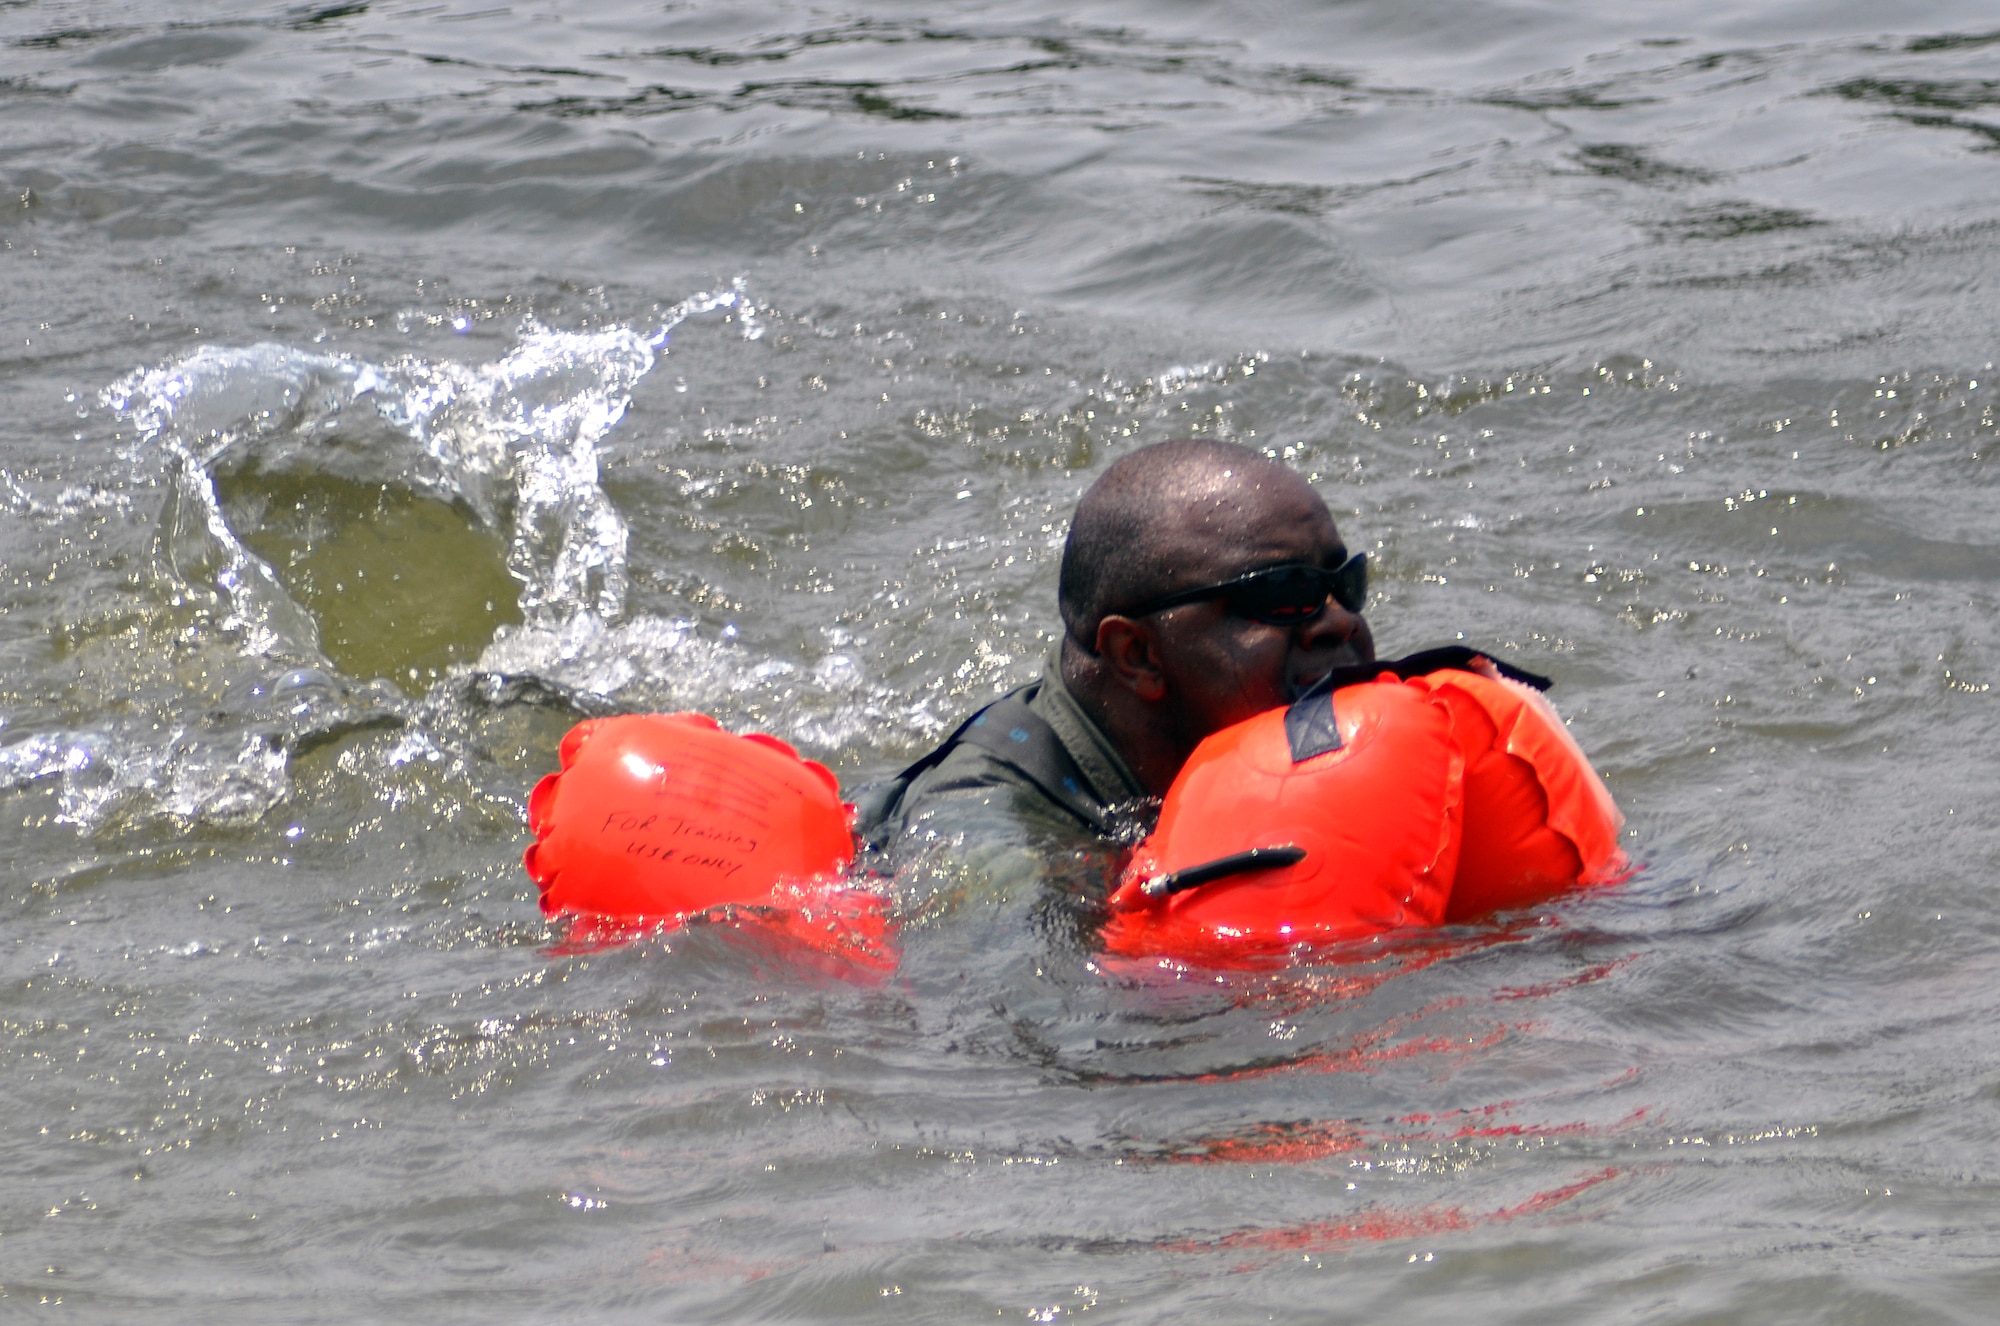 Master Sgt. Johnny Montgomery makes his way to shore during recent 908th Airlift Wing water survival training in the Alabama River.